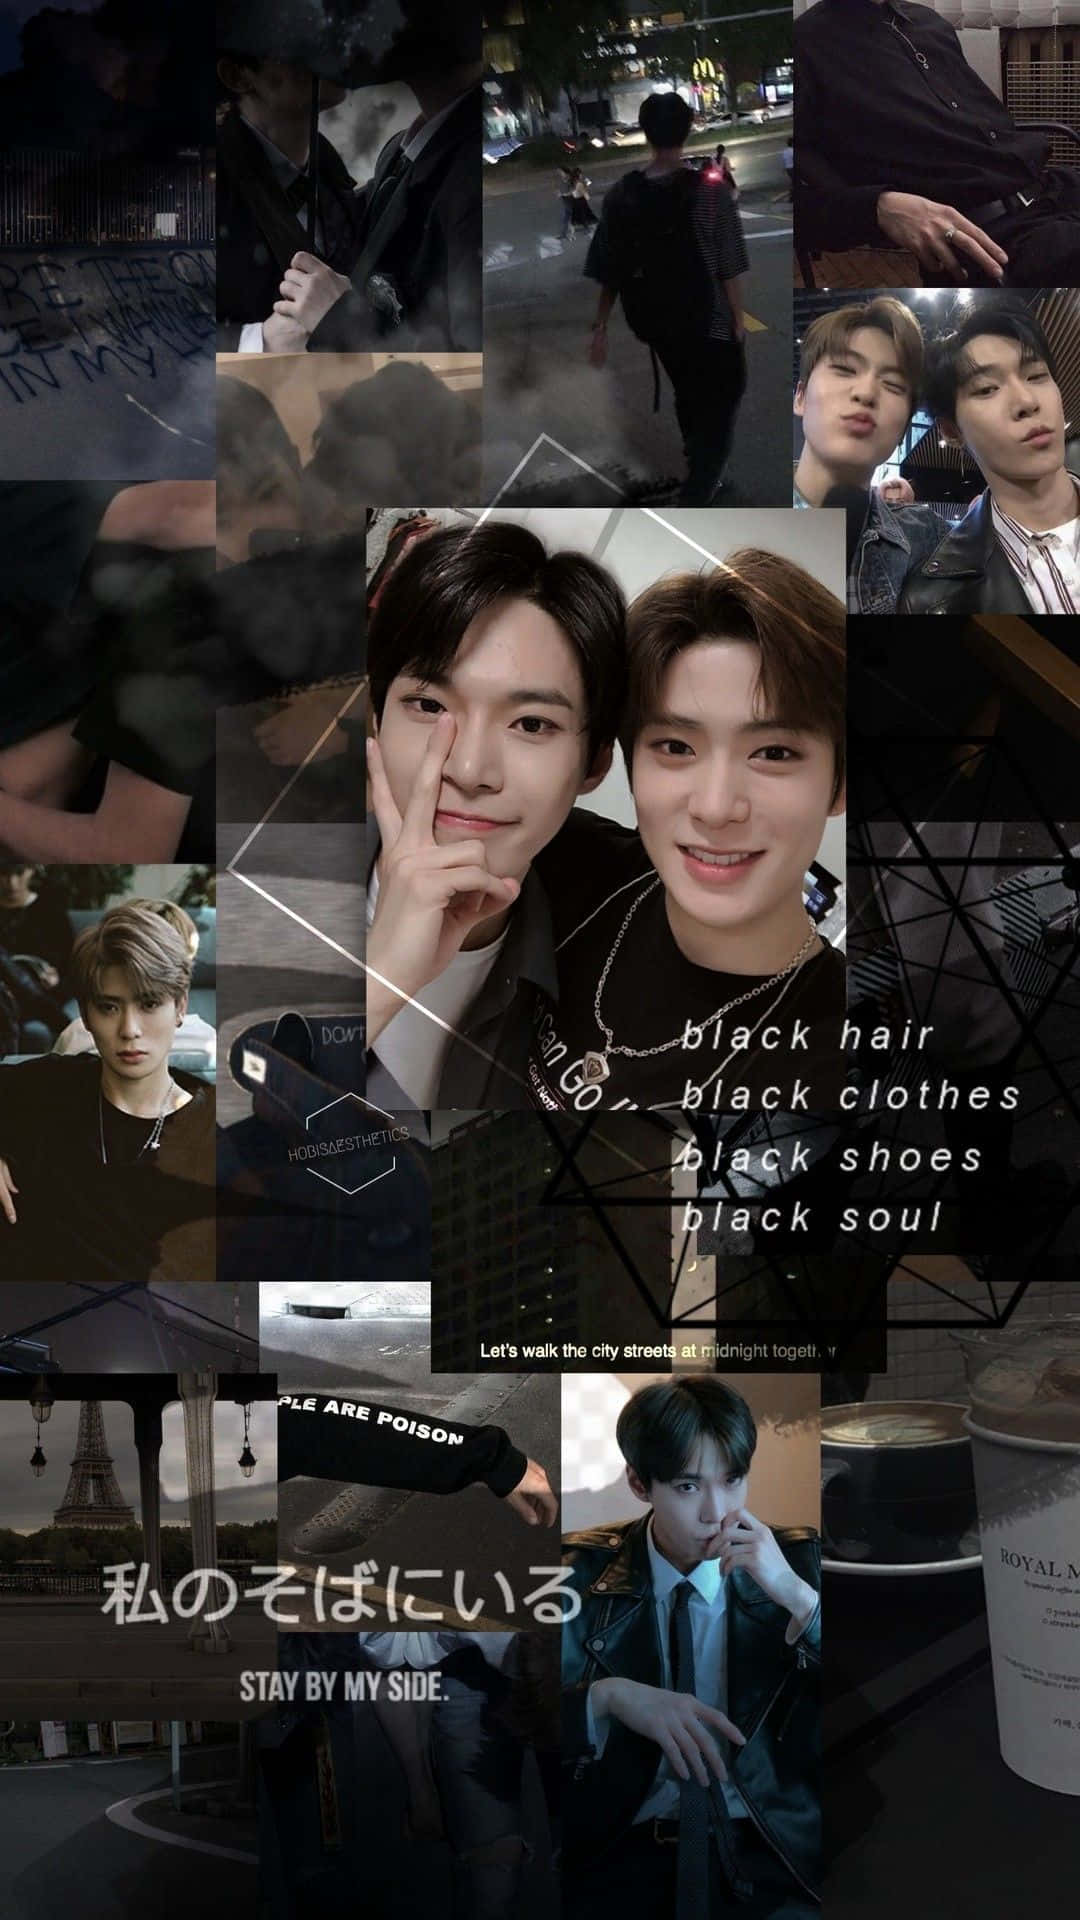 Nct's Jaehyun Radiates Natural Charm In Mobile Collage Background